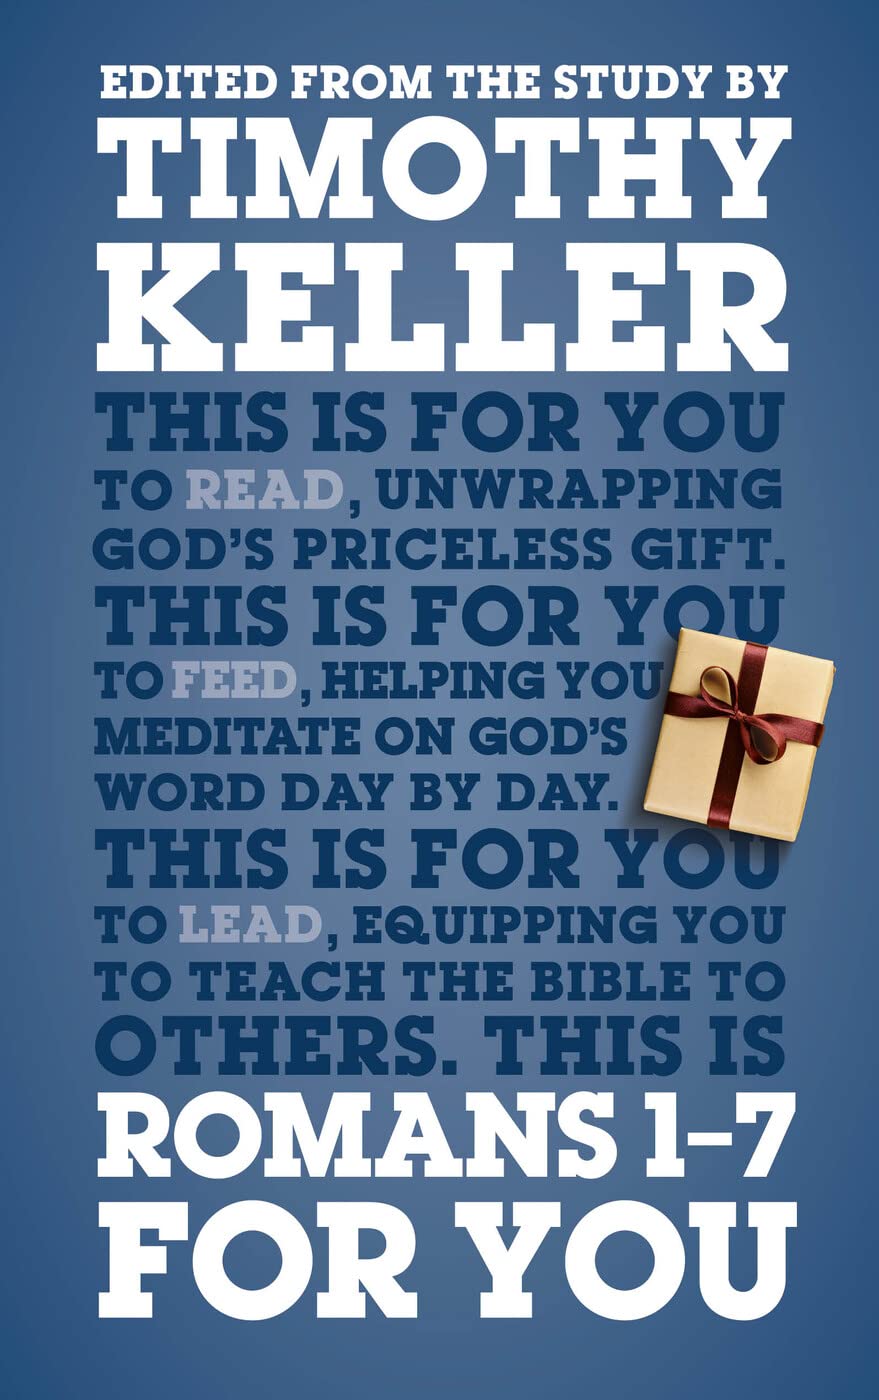 Romans 1 - 7 for You: For Reading, for Feeding, for Leading (God's Word for You)